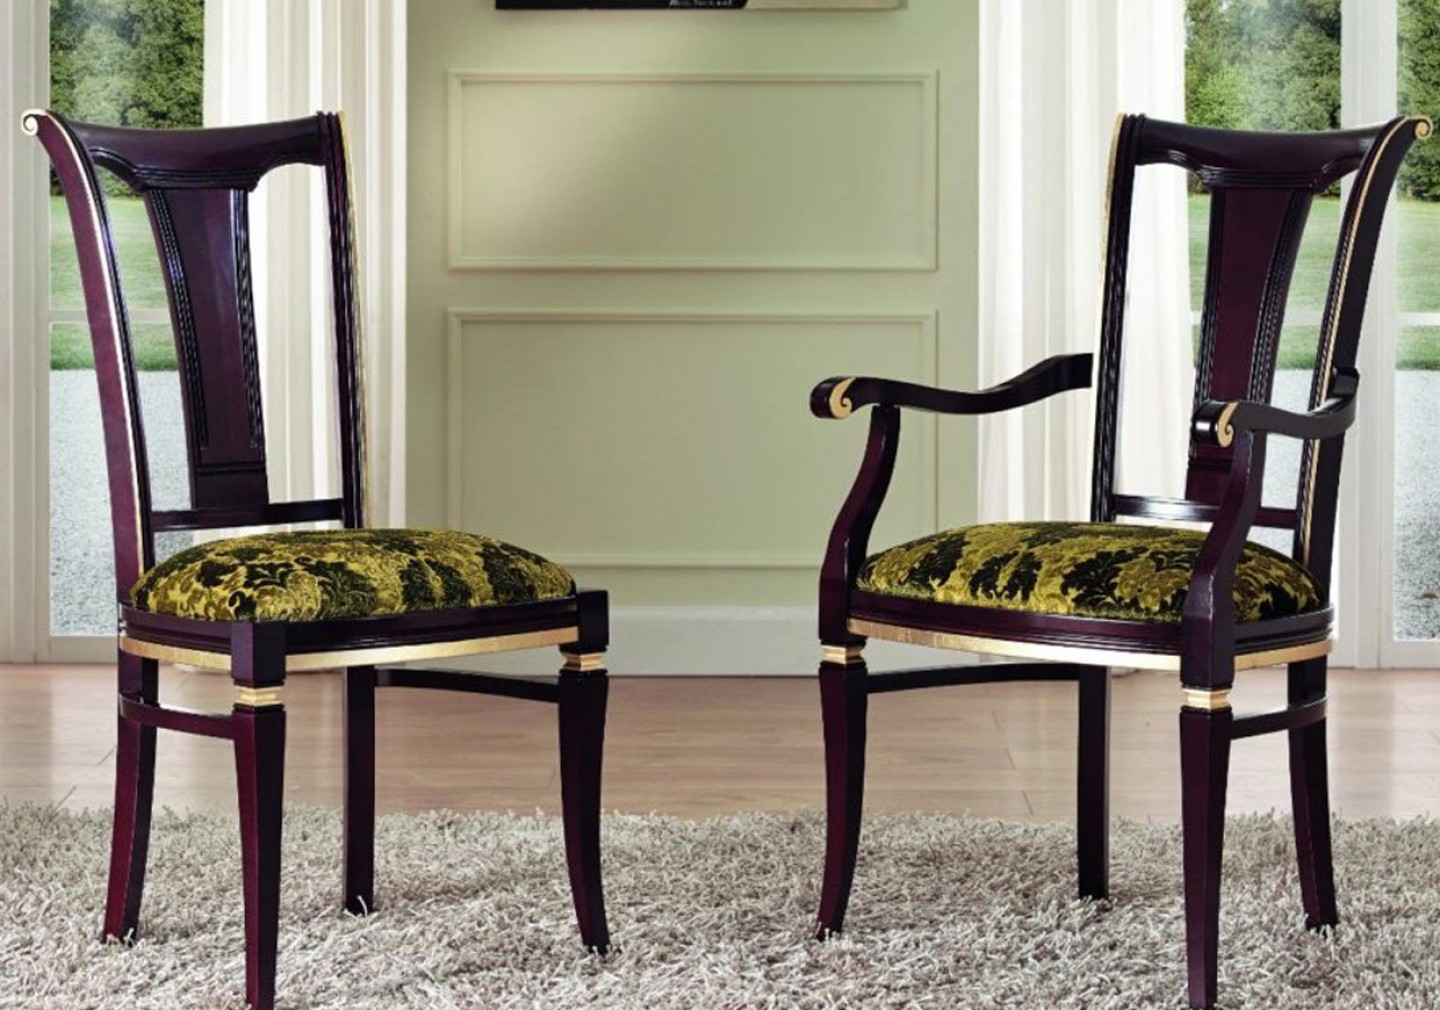 THE TRIESTE CLASSIC DINING CHAIR